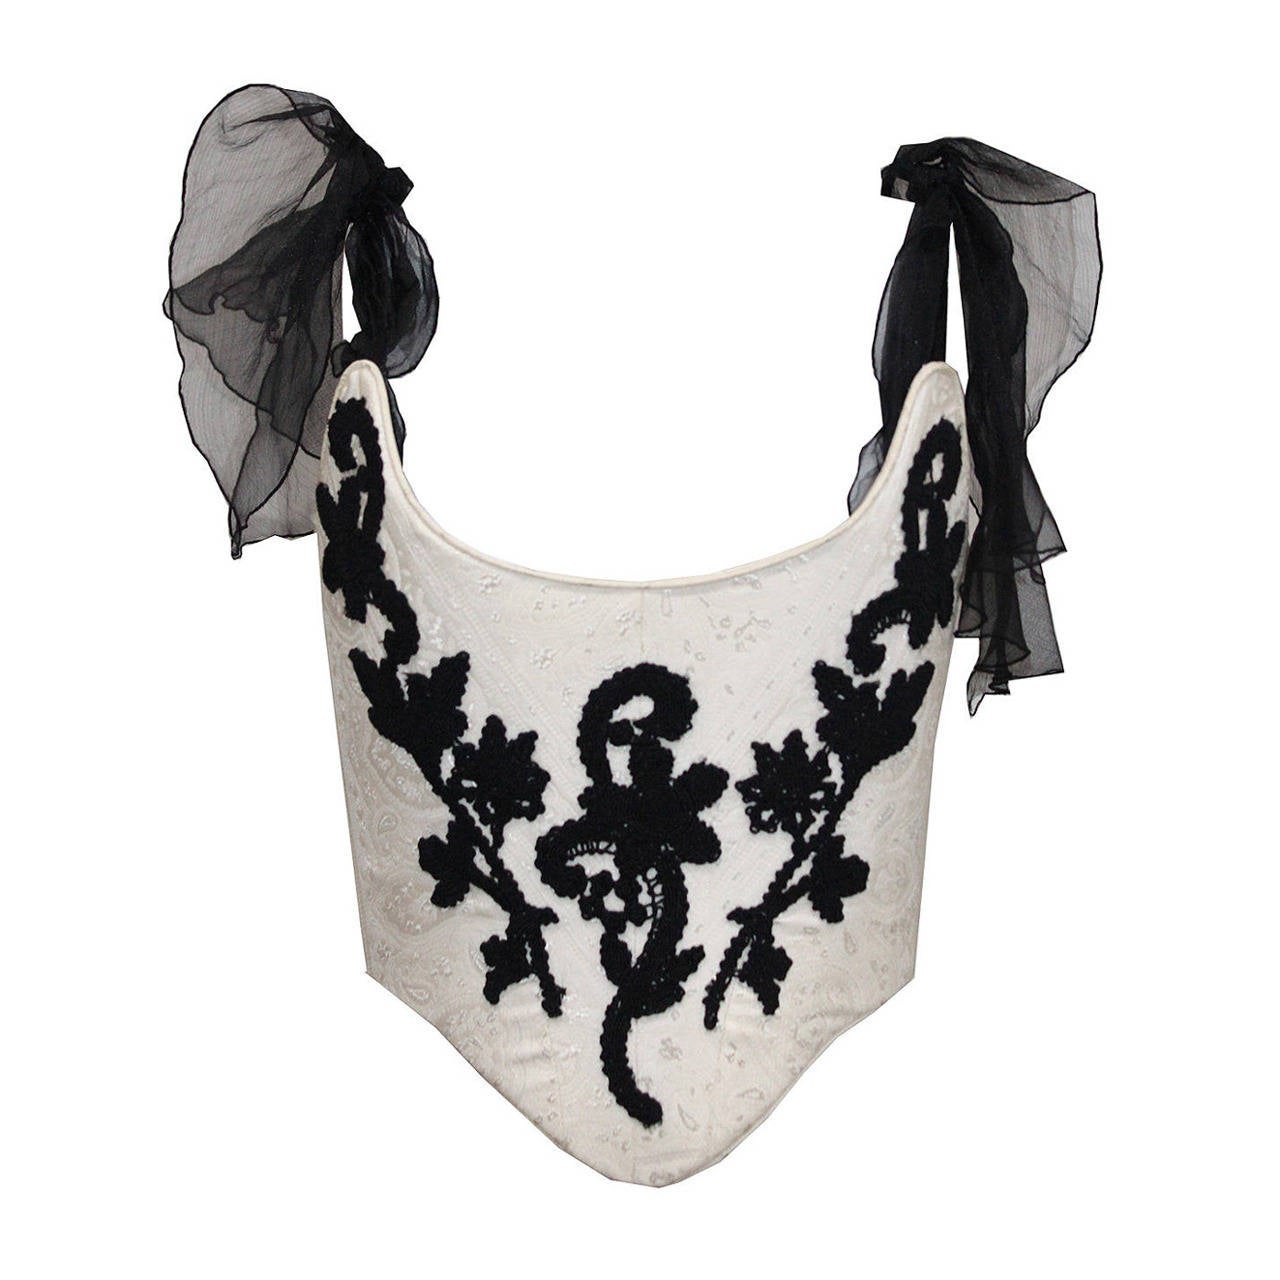 Fine and rare 1980s Christian Lacroix embroidered bustier